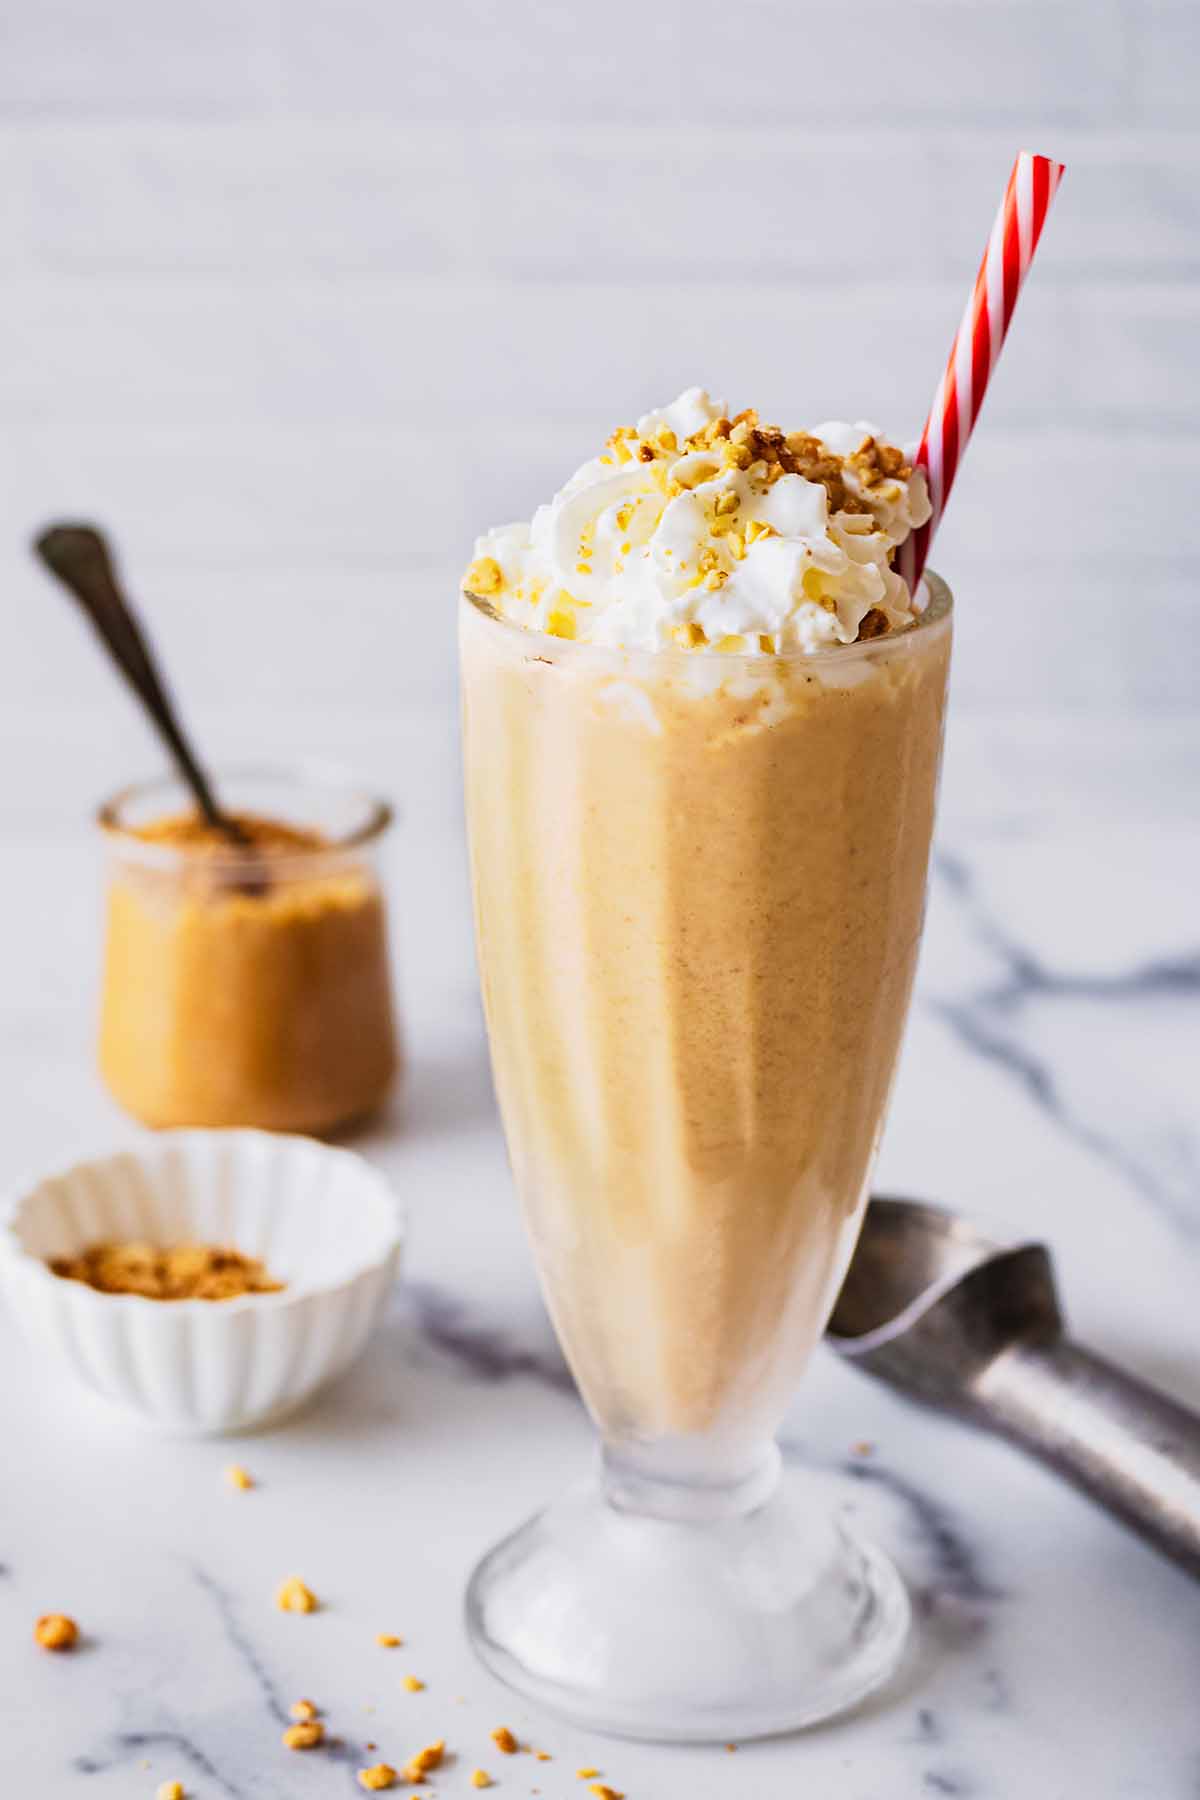 Peanut butter milkshake in a tall glass with whipped cream and a red and white straw.